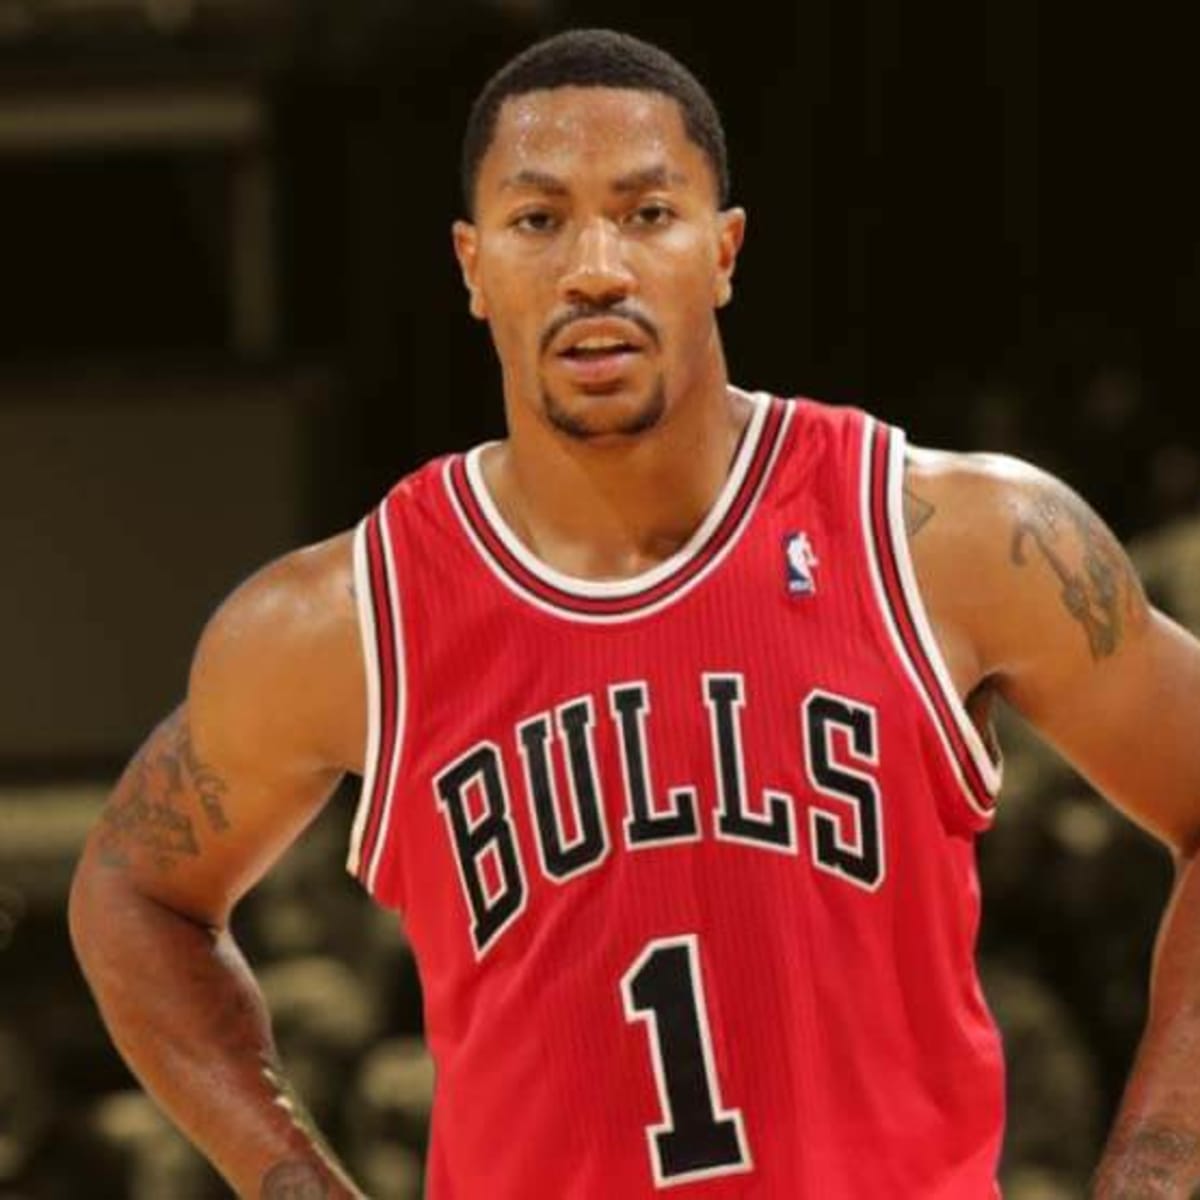 Derrick Rose in summer league basketball when he was a Rookie to the NBA